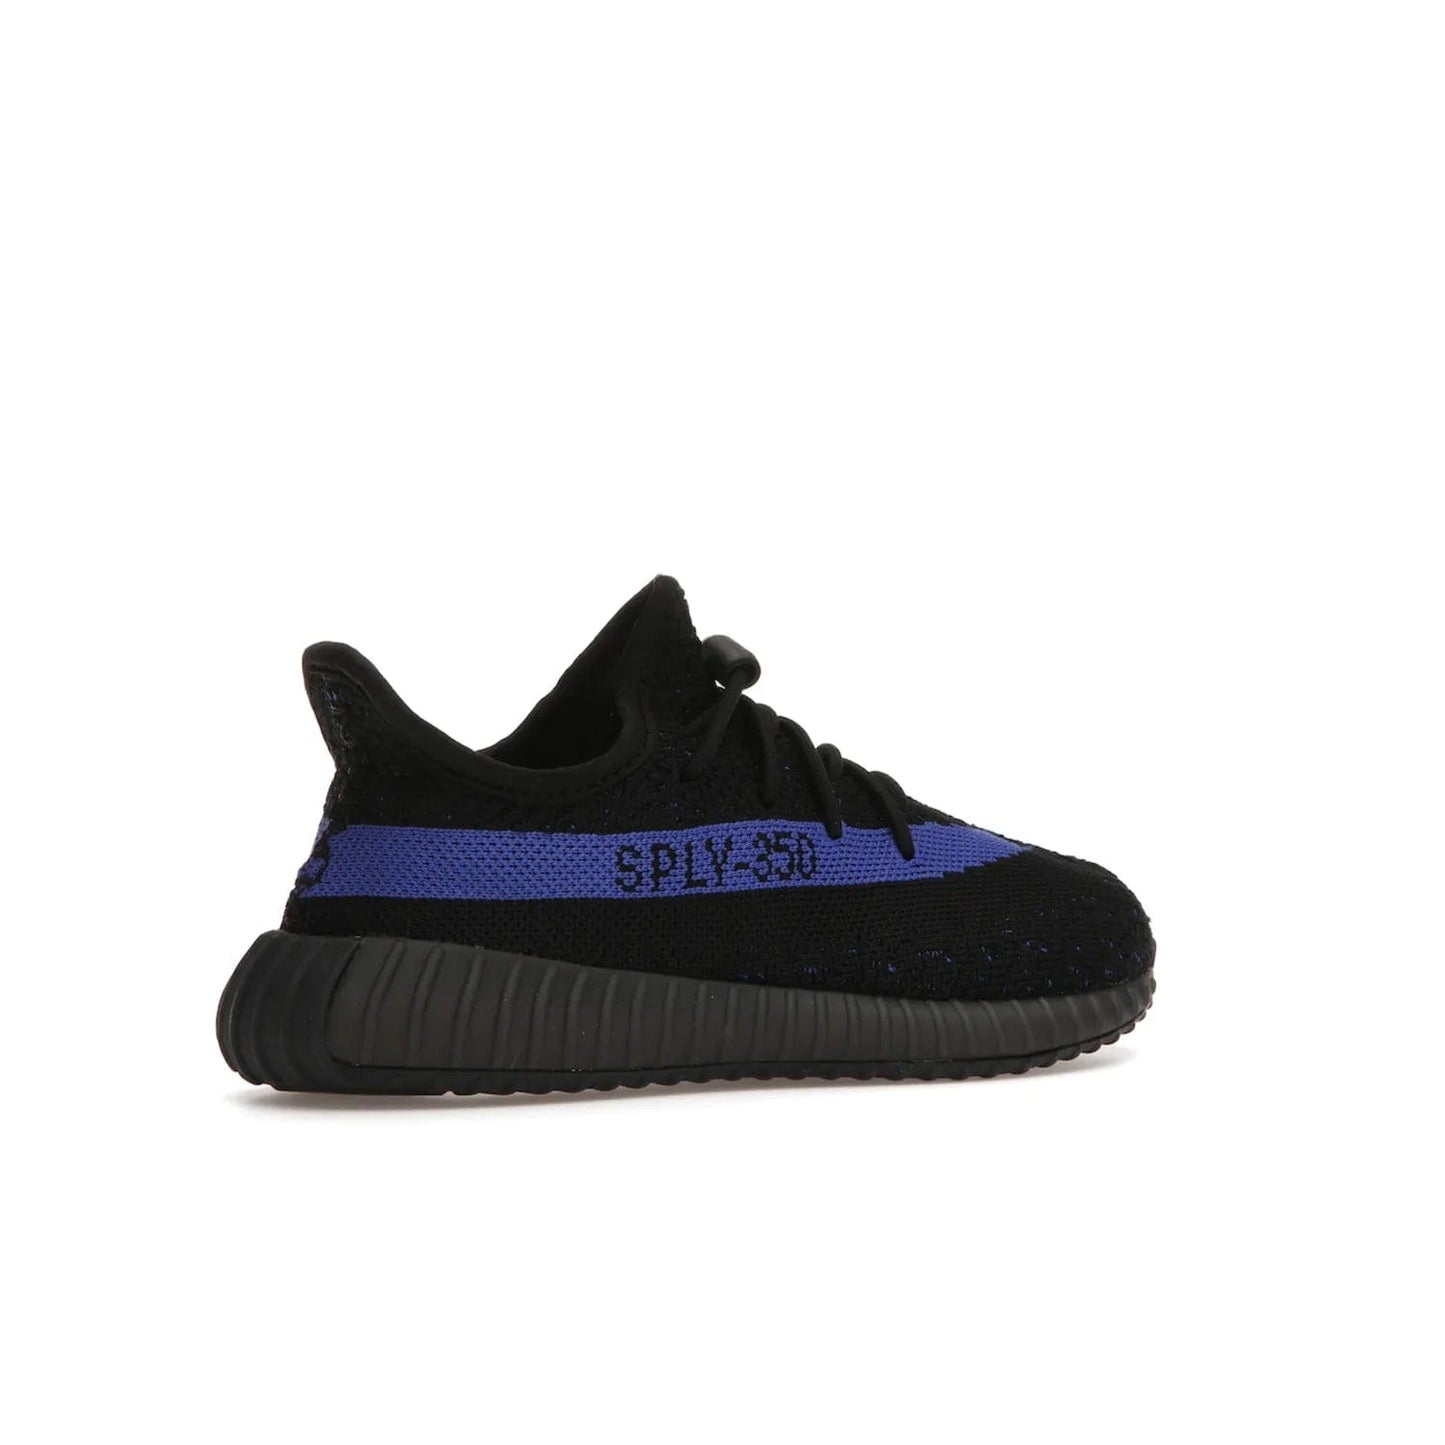 adidas Yeezy Boost 350 V2 Dazzling Blue (Kids) - Image 34 - Only at www.BallersClubKickz.com - Shop the adidas Yeezy Boost 350 V2 Dazzling Blue (Kids). Features a black Primeknit upper with a royal blue 'SPLY-350' streak and a full-length Boost midsole. Durable rubber outsole provides plenty of traction. Available for $160.